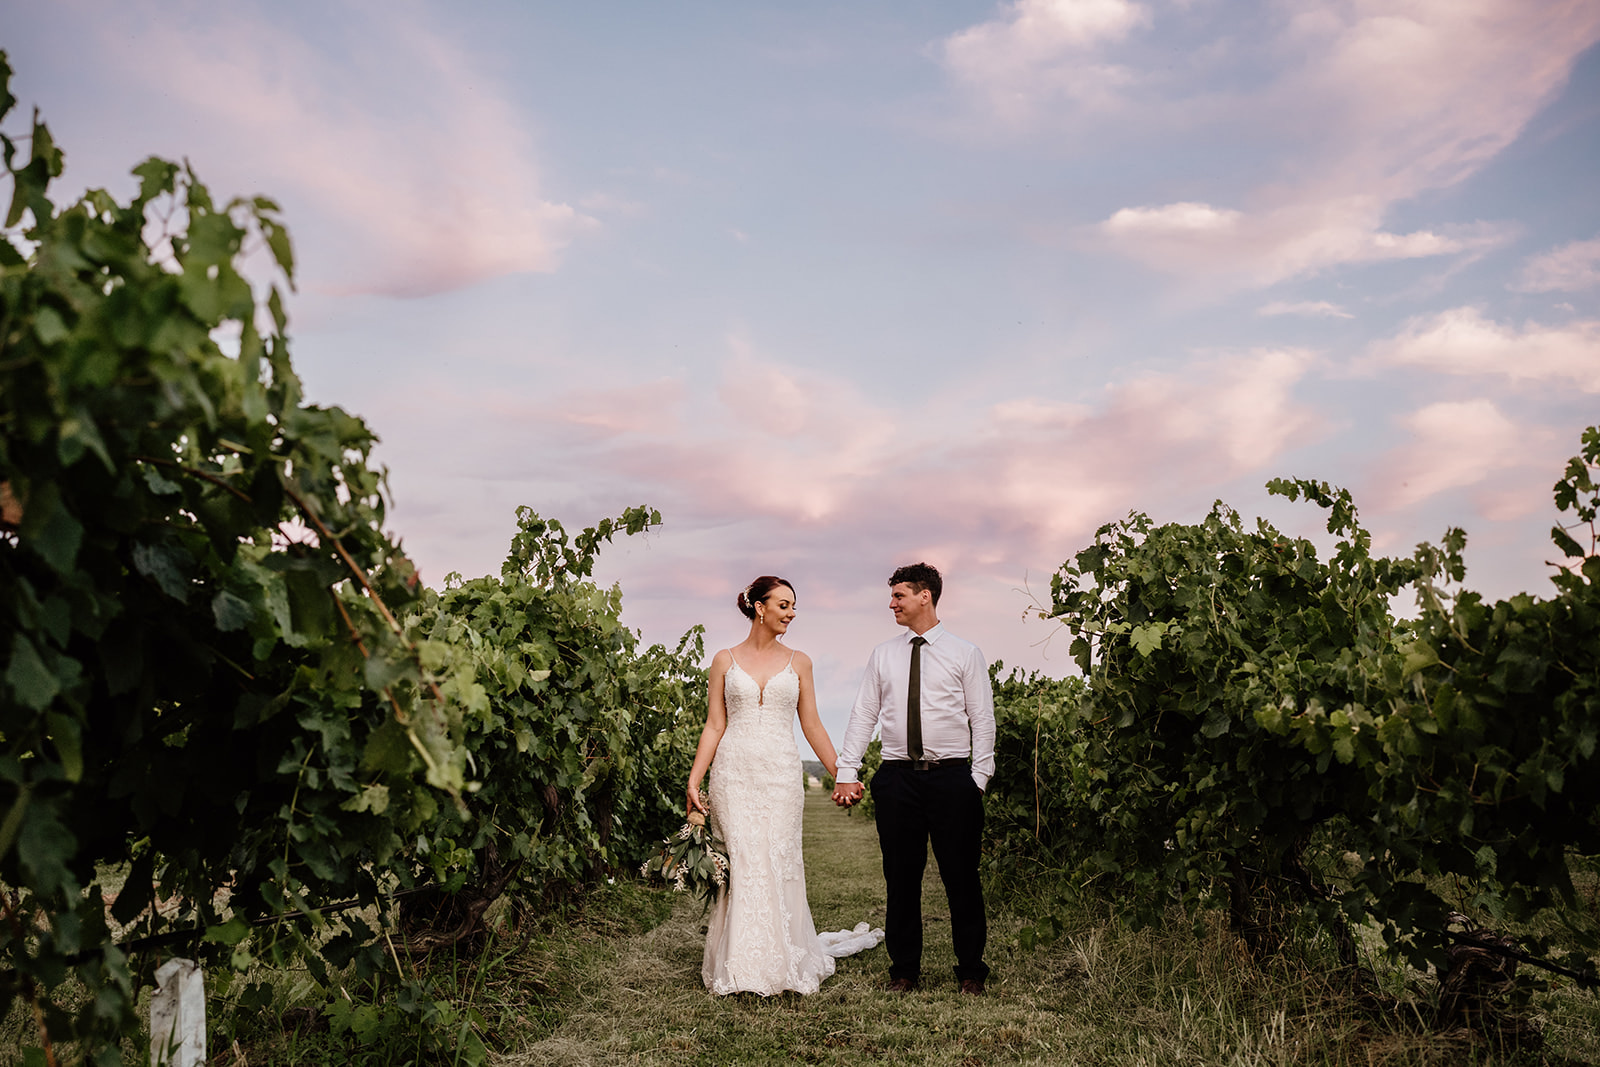 Bride and groom photo among the vineyards at Buller Wines in Rutherglen. Sunset wedding photo in Rutherglen.